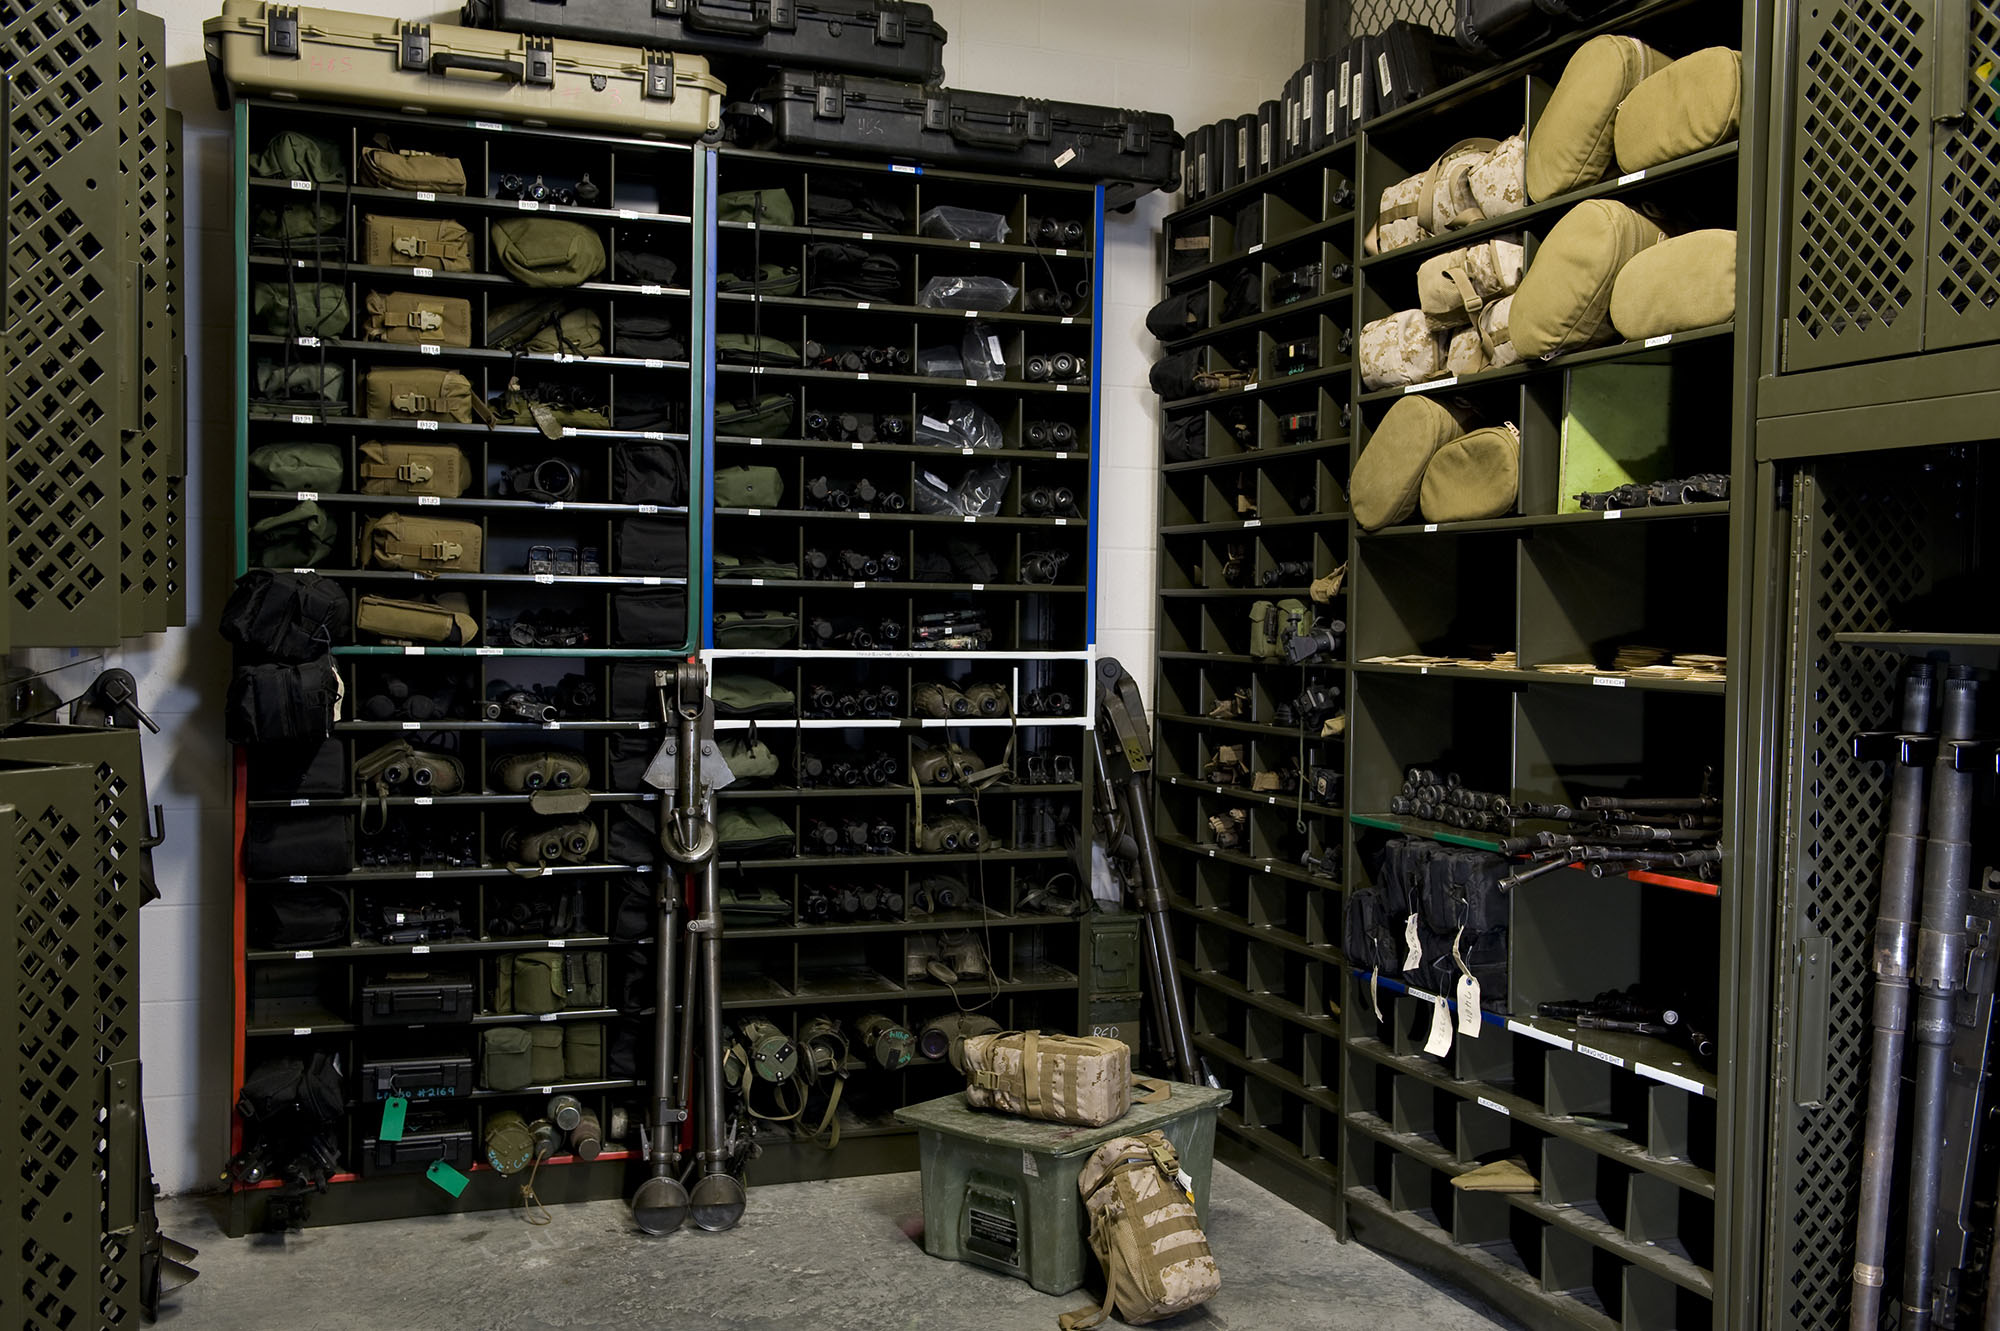 Optic and weapons storage in arms room at military base